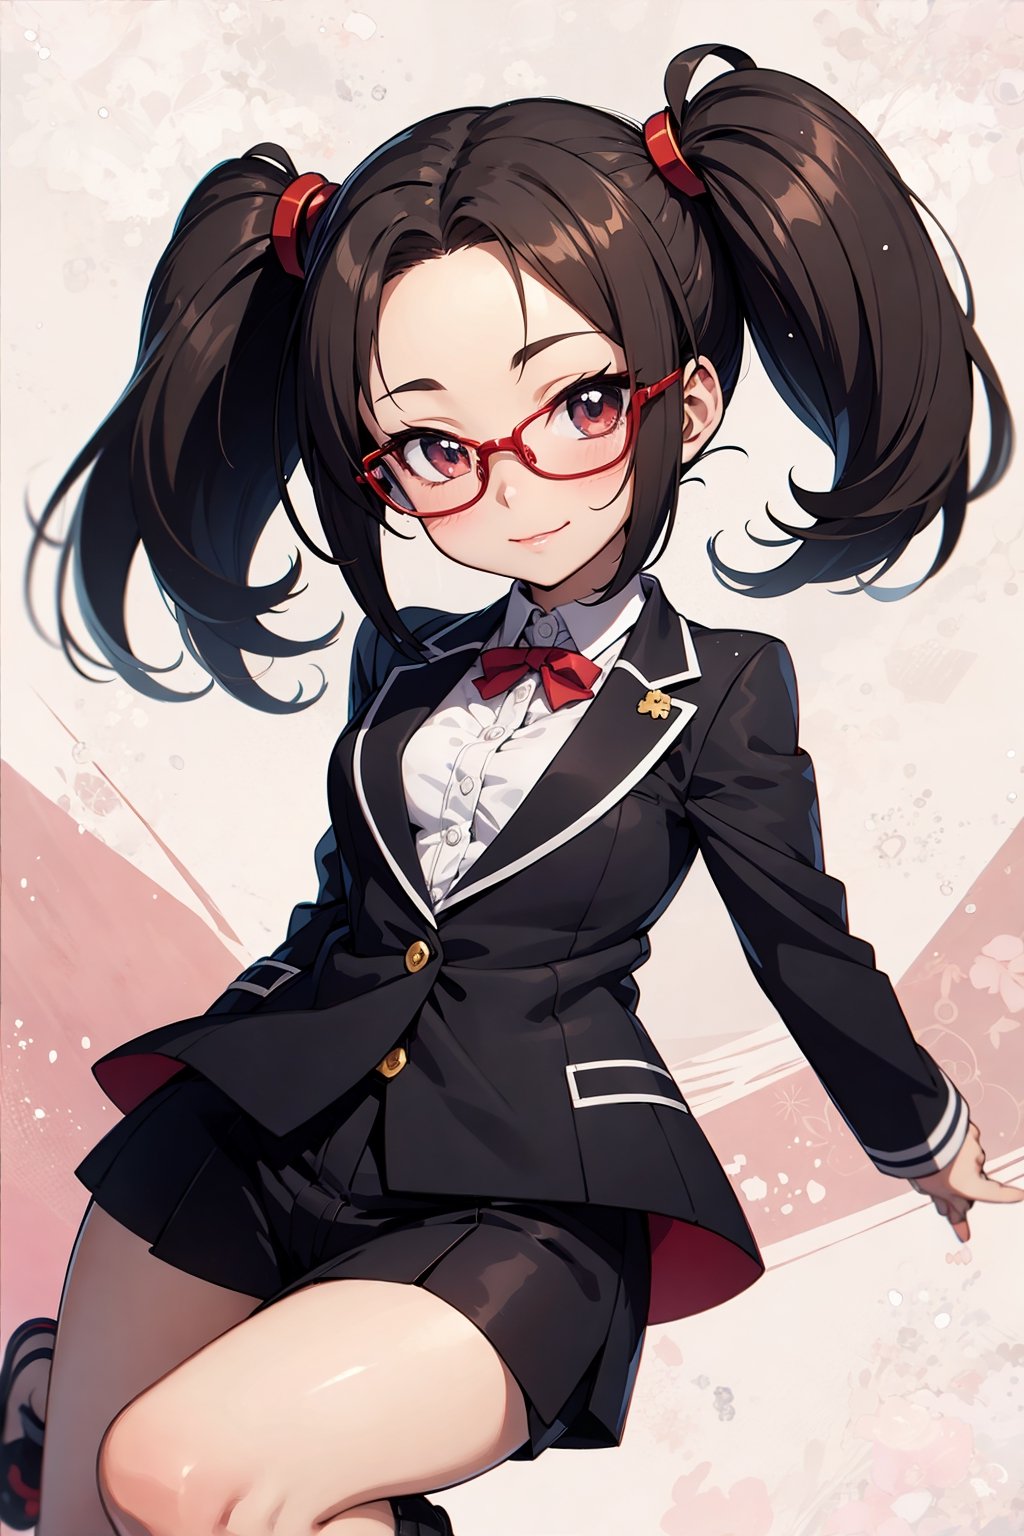 (chibi:1.5)fullbody,ten,tenten,10,1010,short twintails,
RAW photo1girl, (suit:1.3), brown_eyes, black_hair, straight hair, lips, (forehead:1.3), cute, medium breasts, plump, petite, loli, glasses, , closed mouth, convergent strabismus, bashful, shy, blushing, smile, (anime:1.3)(illustration:1.3)
BREAK
morning, Cheerfully greeting everyone, colourful background, Model shooting style(anime:1.5)BREAK
simple white background,
